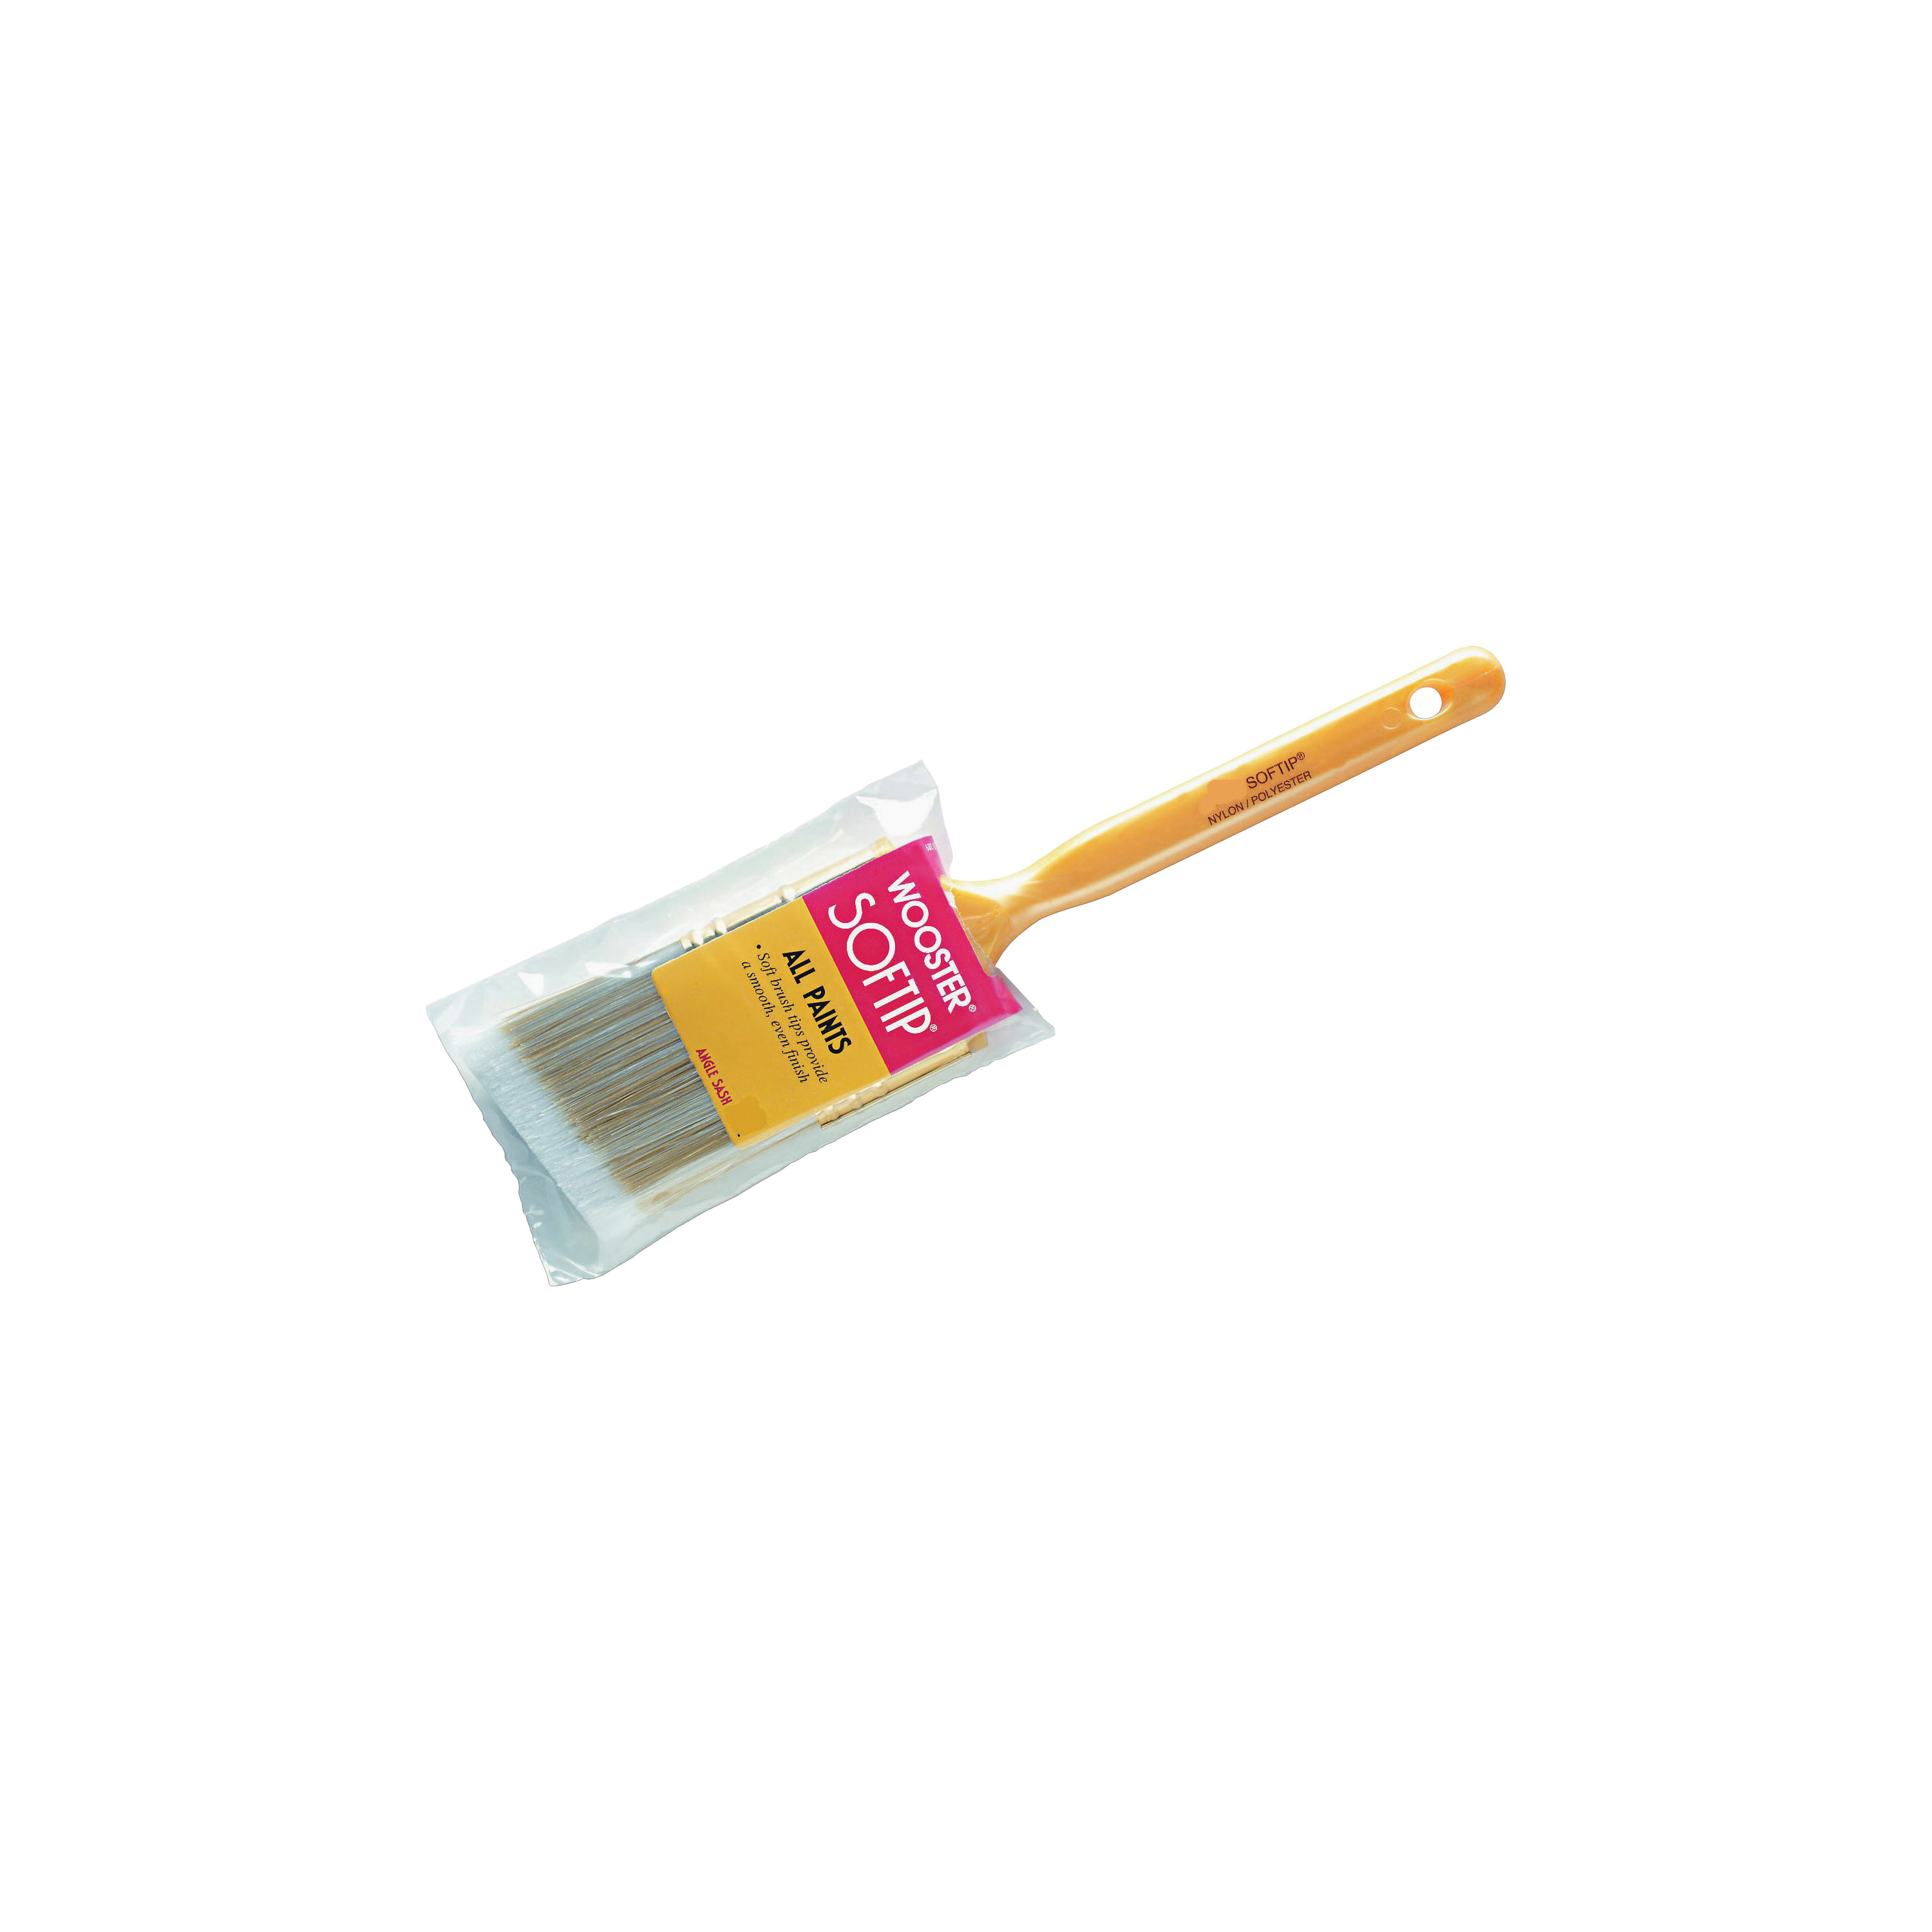 Wooster Q3208-2-1/2 Paint Brush, 2-1/2 in W, 2-7/16 in L Bristle, Nylon/Polyester Bristle, Beaver Tail Handle